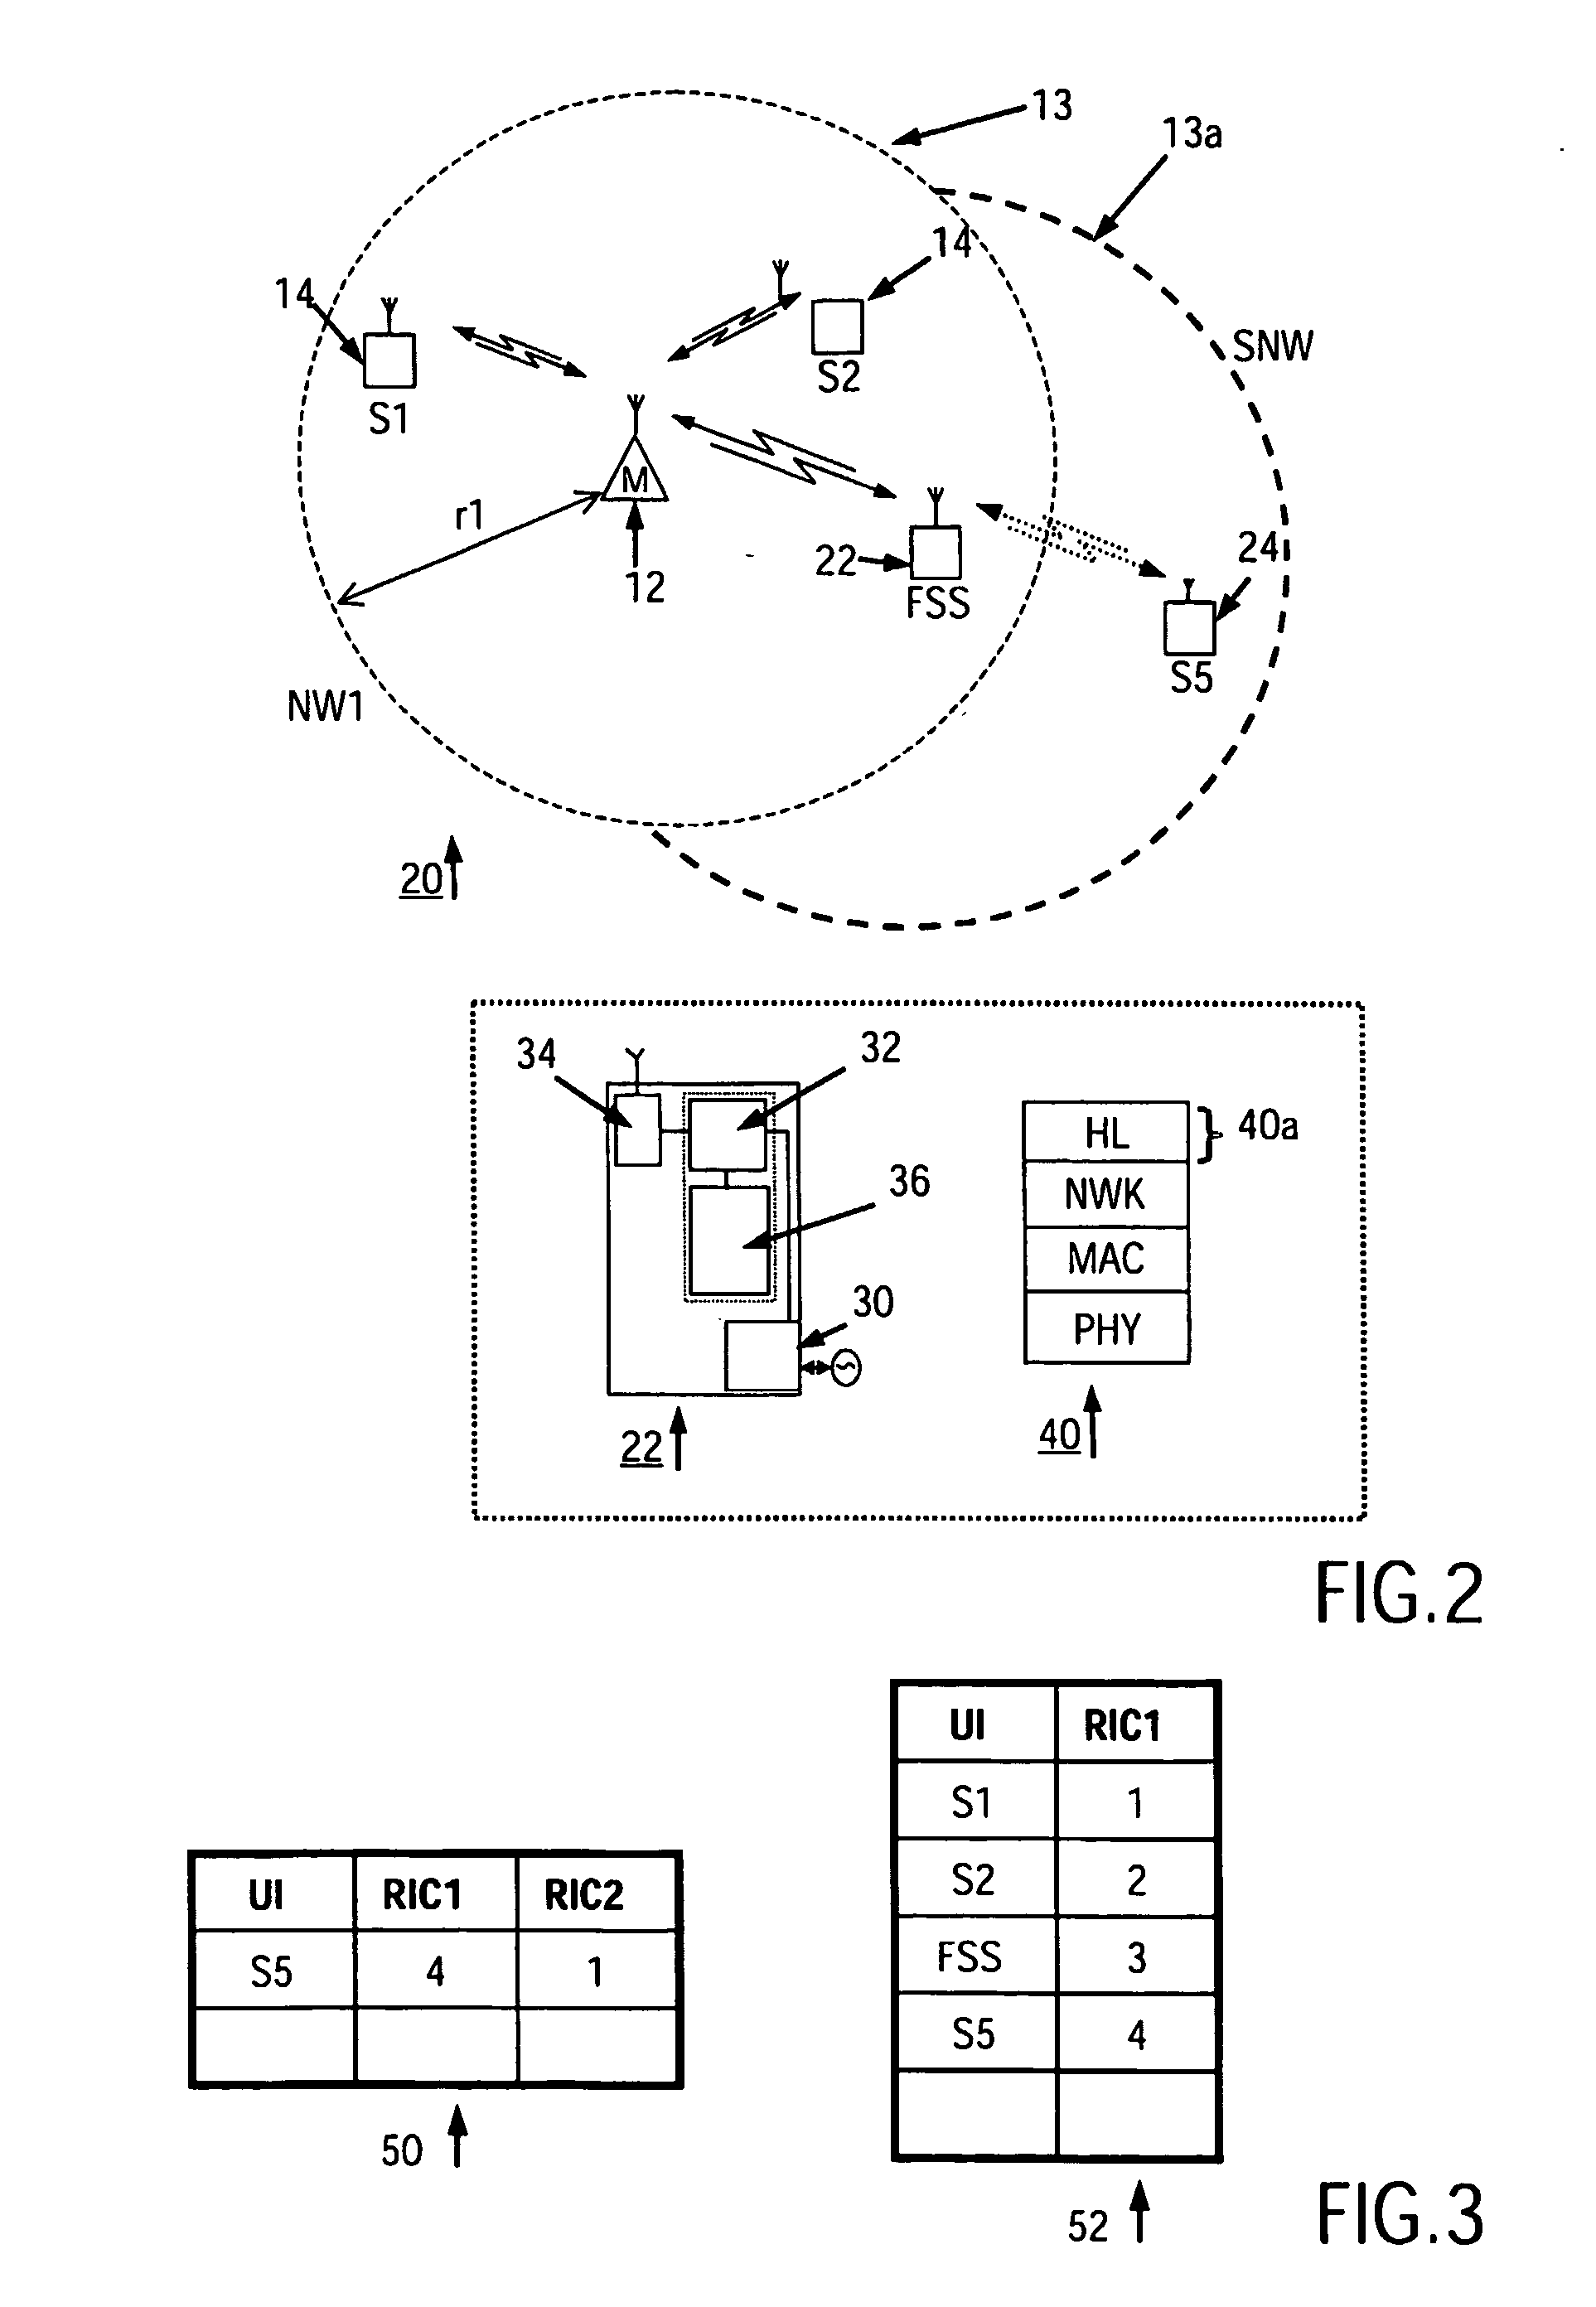 Communication system with an extended coverage area